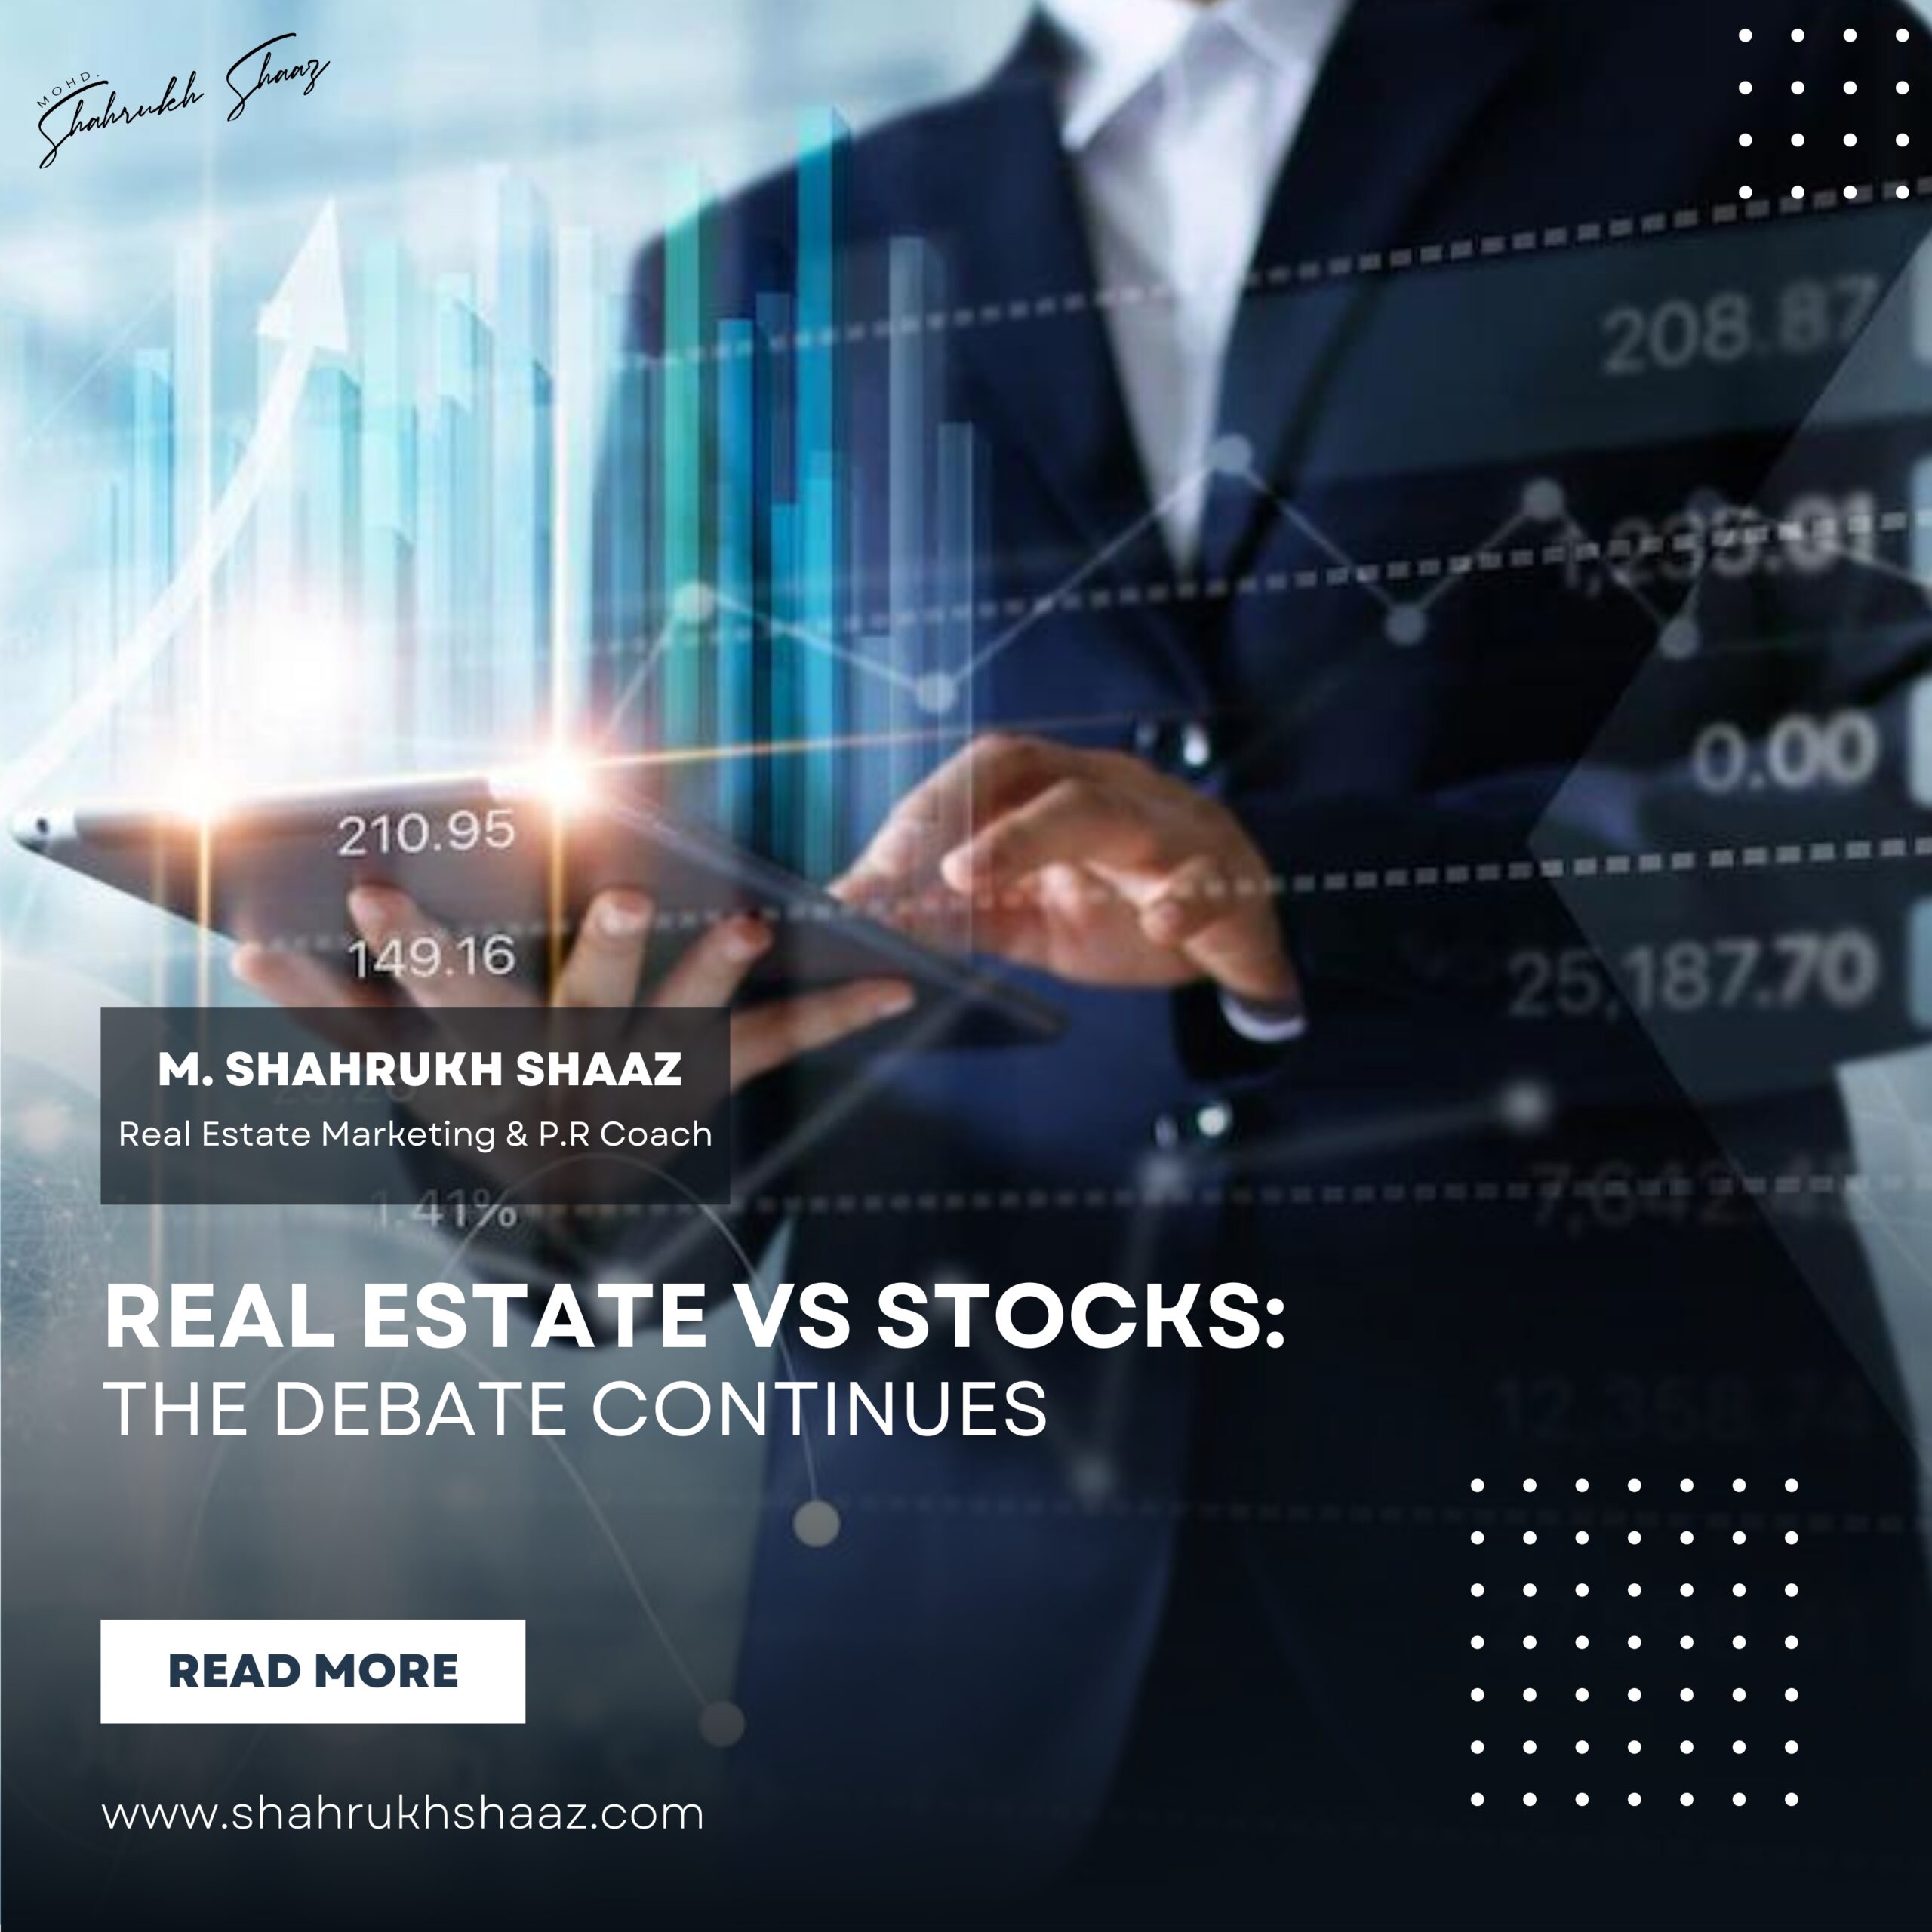 Real Estate vs Stocks: The Debate Continues. By M. Shahrukh Shaaz